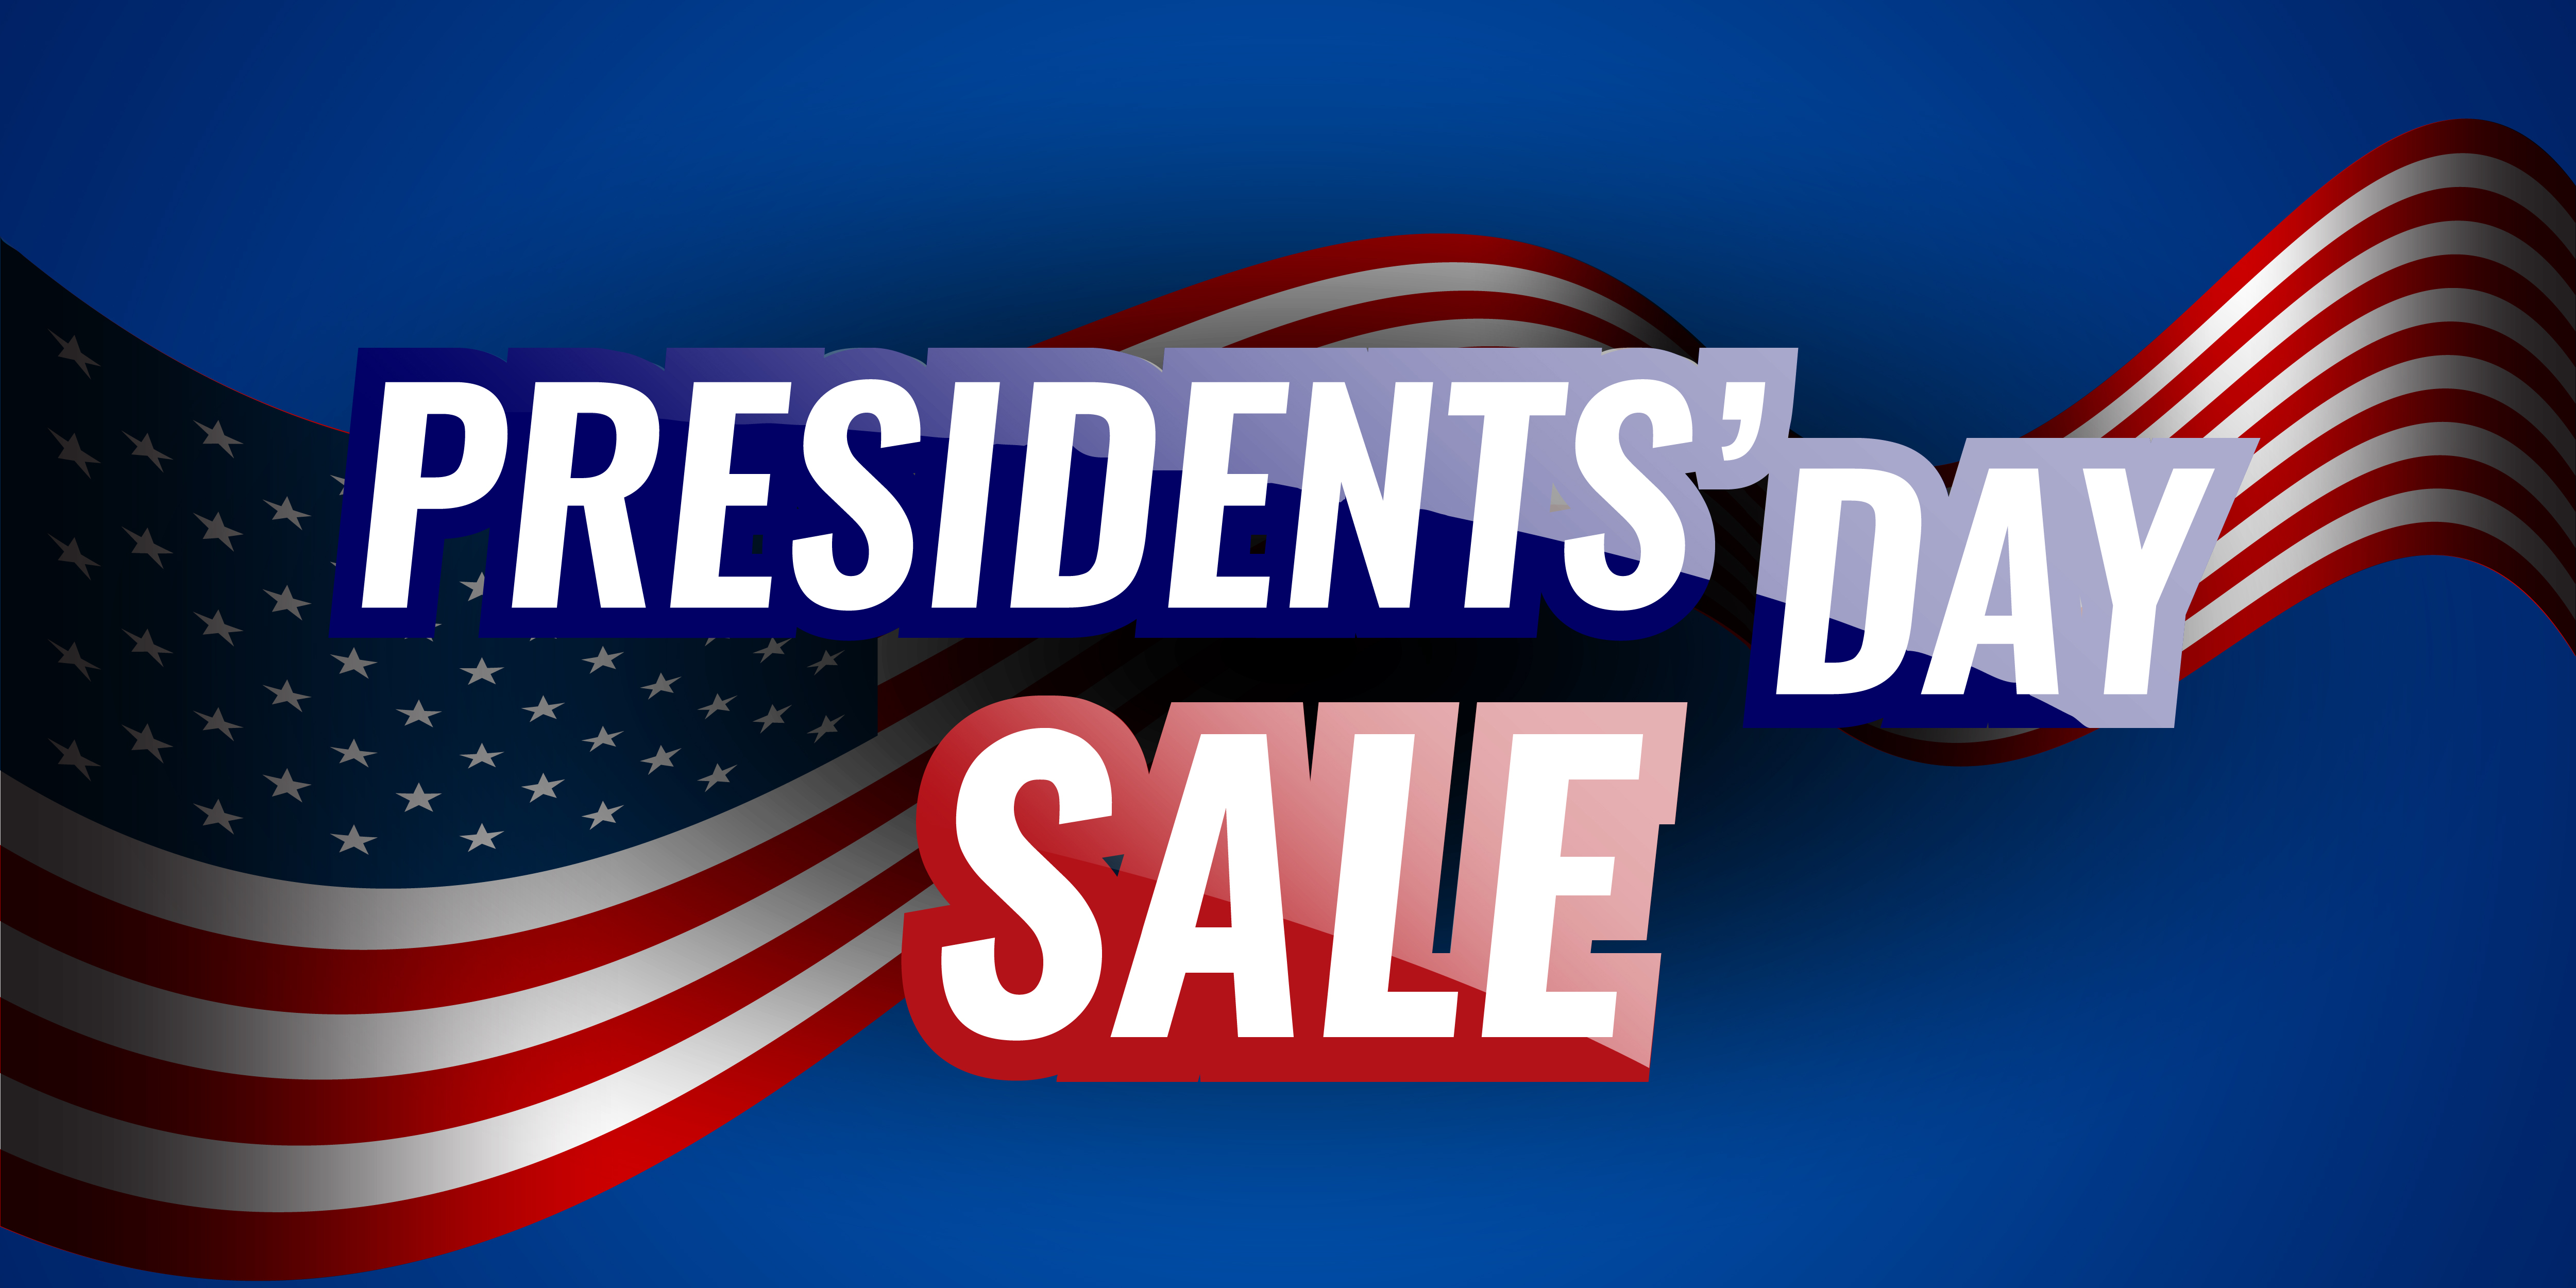 The 10 best Presidents' Day sales to 